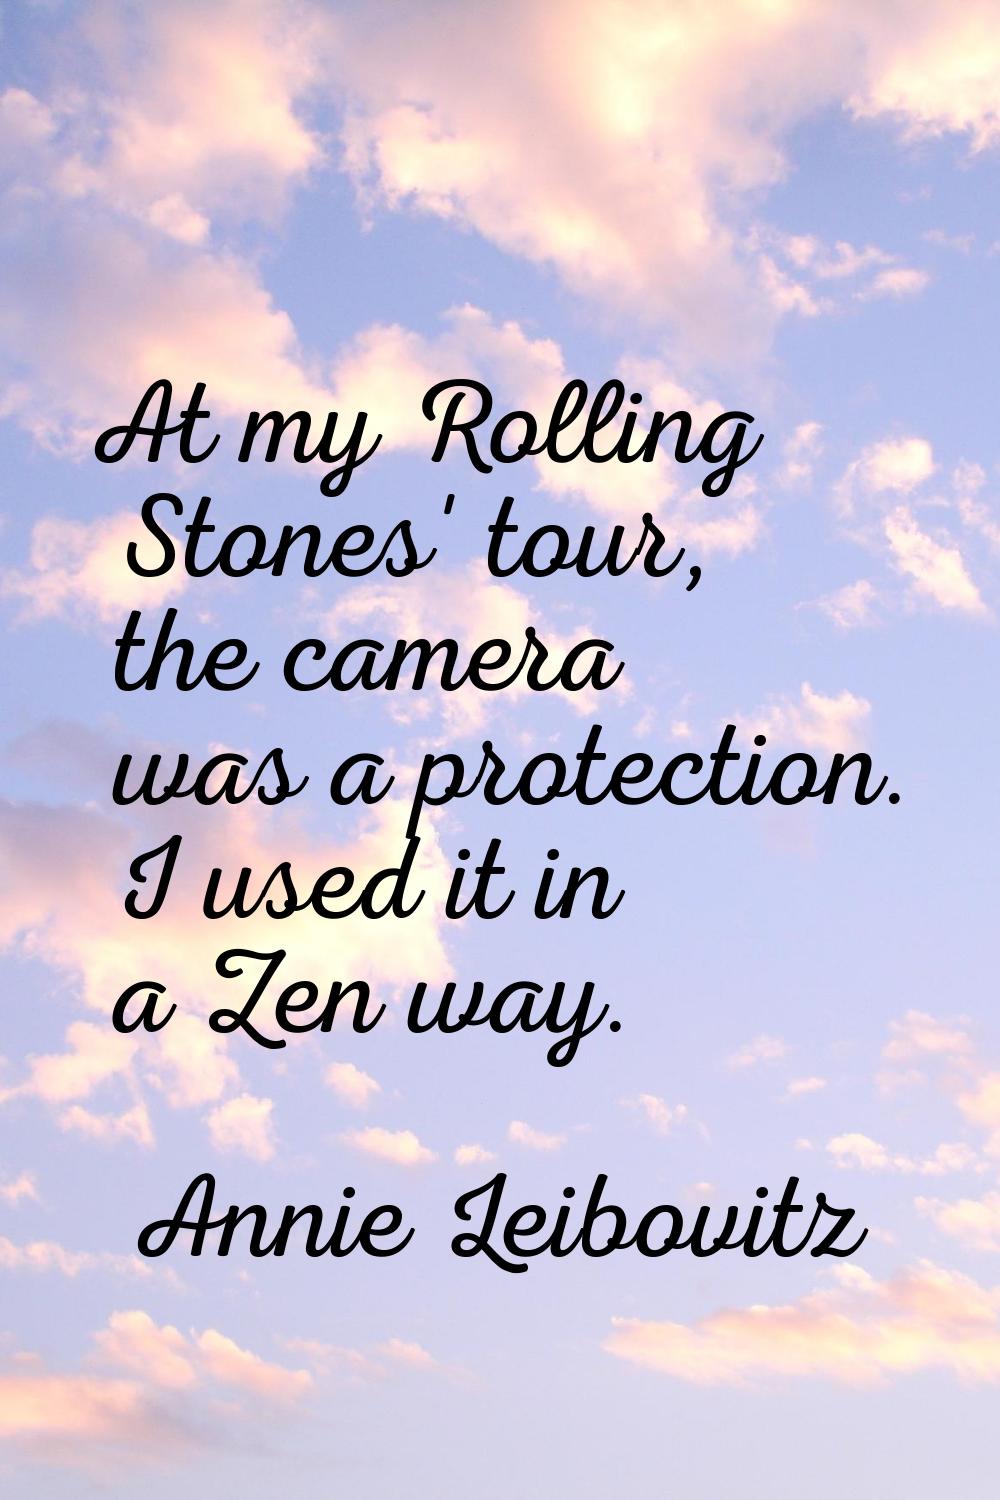 At my Rolling Stones' tour, the camera was a protection. I used it in a Zen way.